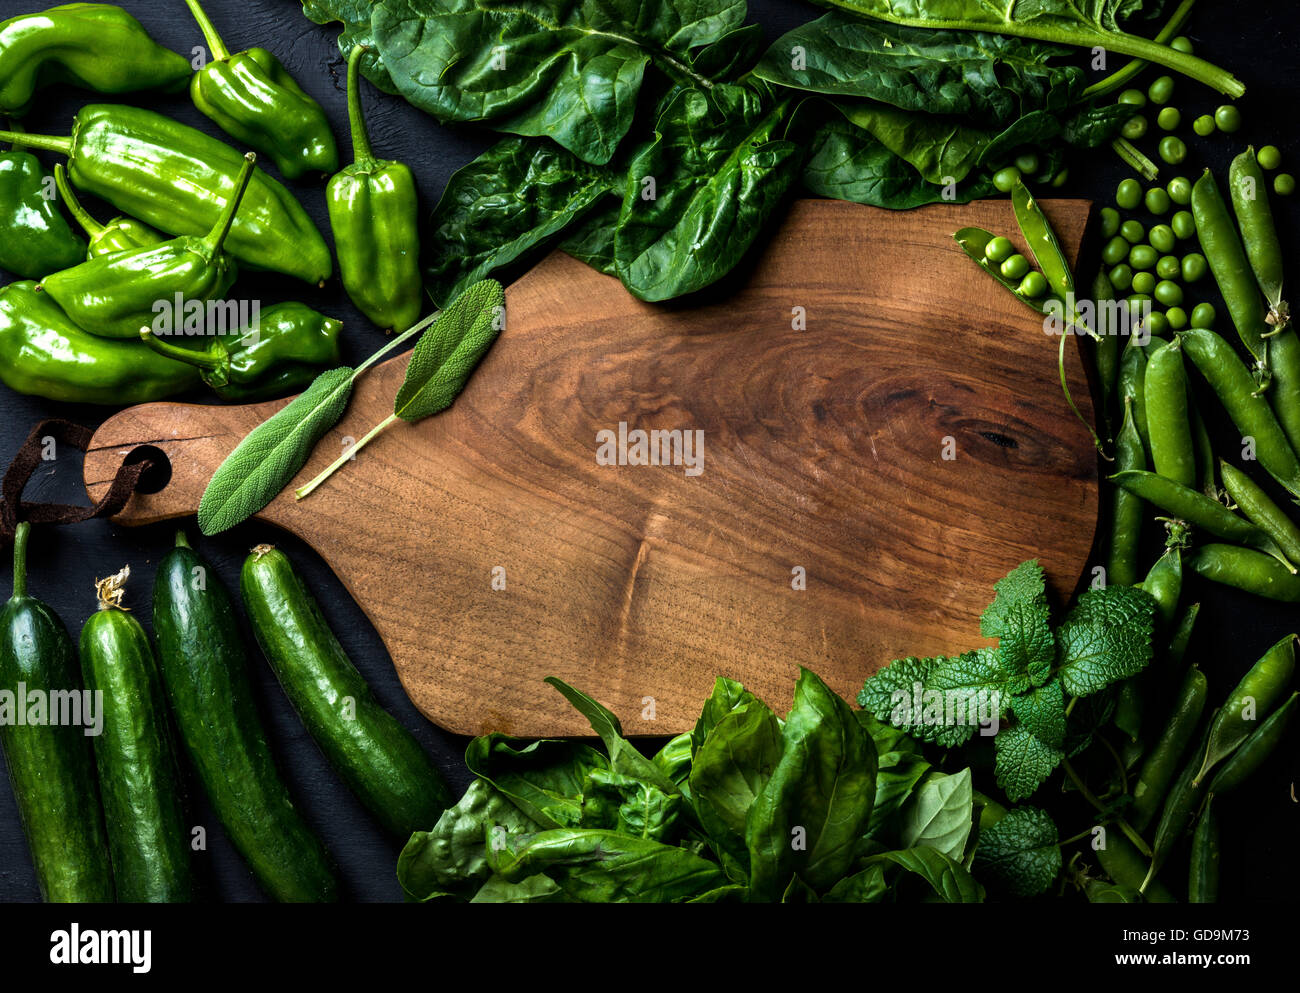 Fresh raw green vegetable ingredients for healthy cooking or salad making with dark wooden cutting baoard in center, top view, c Stock Photo